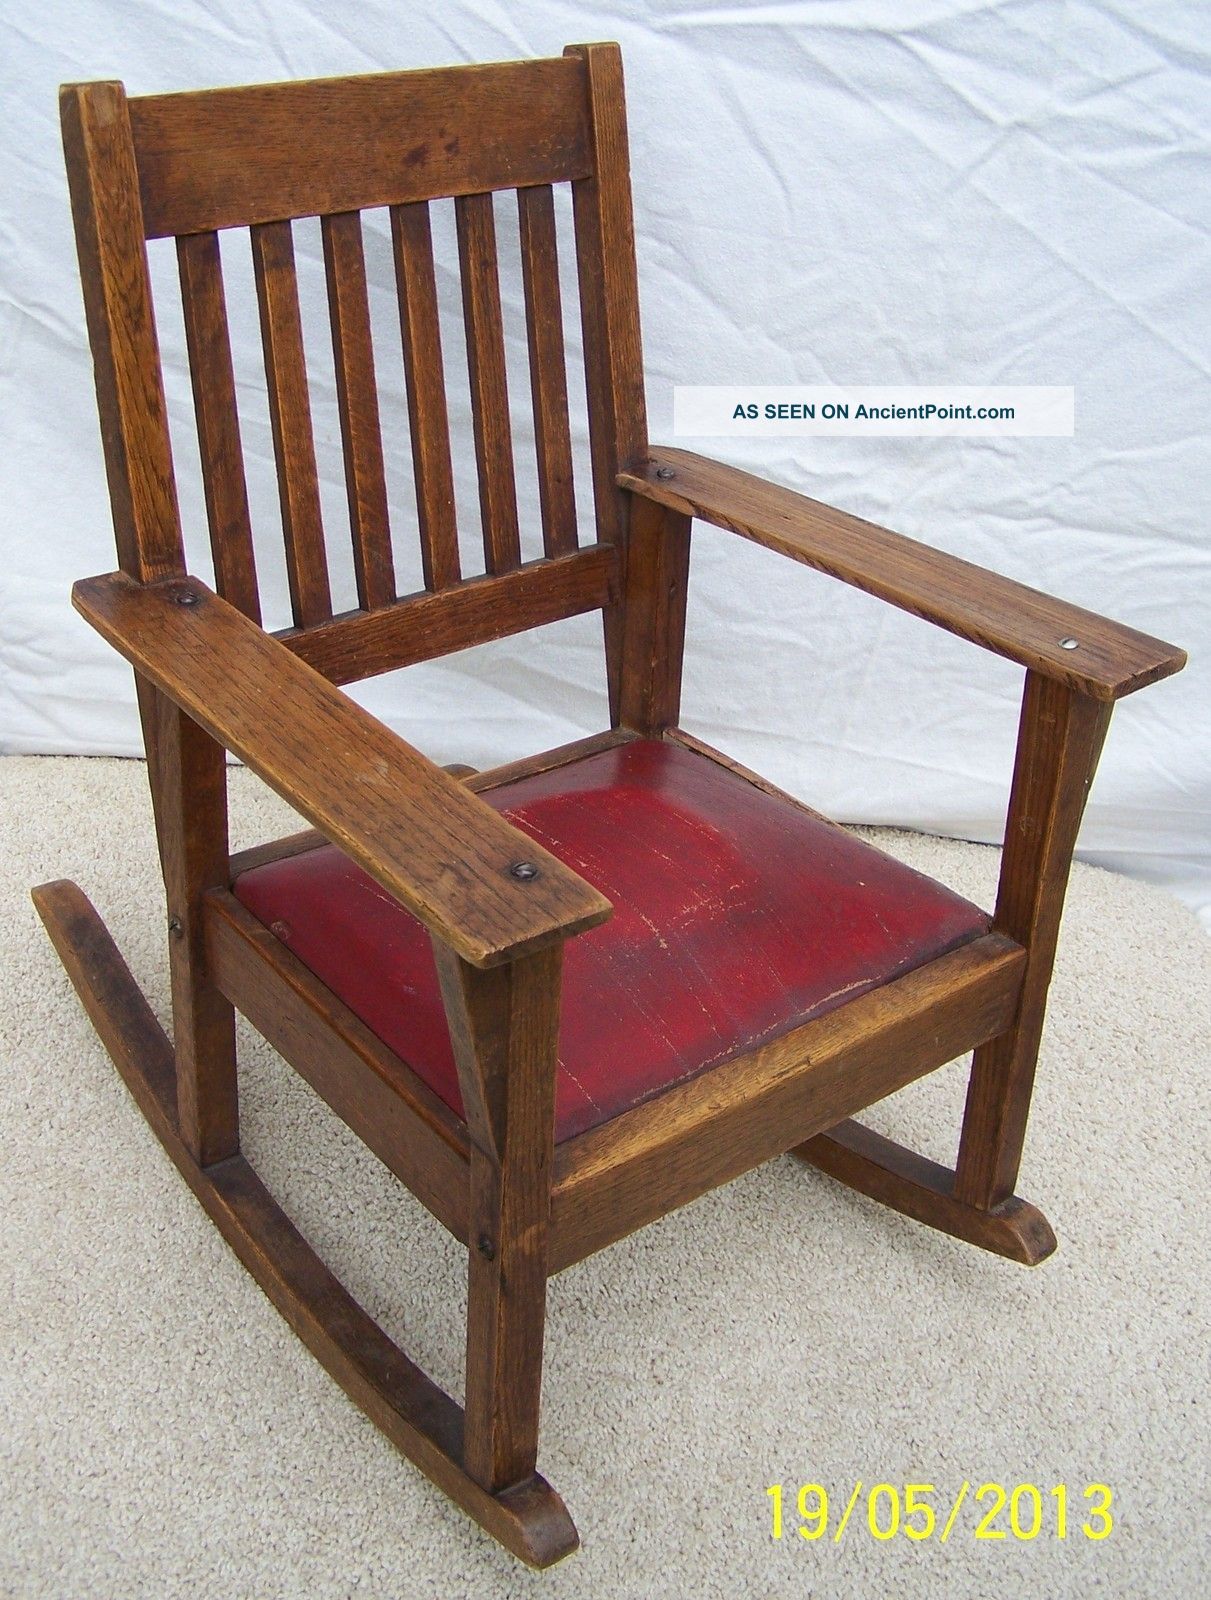 Click Photo To Enlarge Category Furniture Chairs Post 1950 Uploaded By